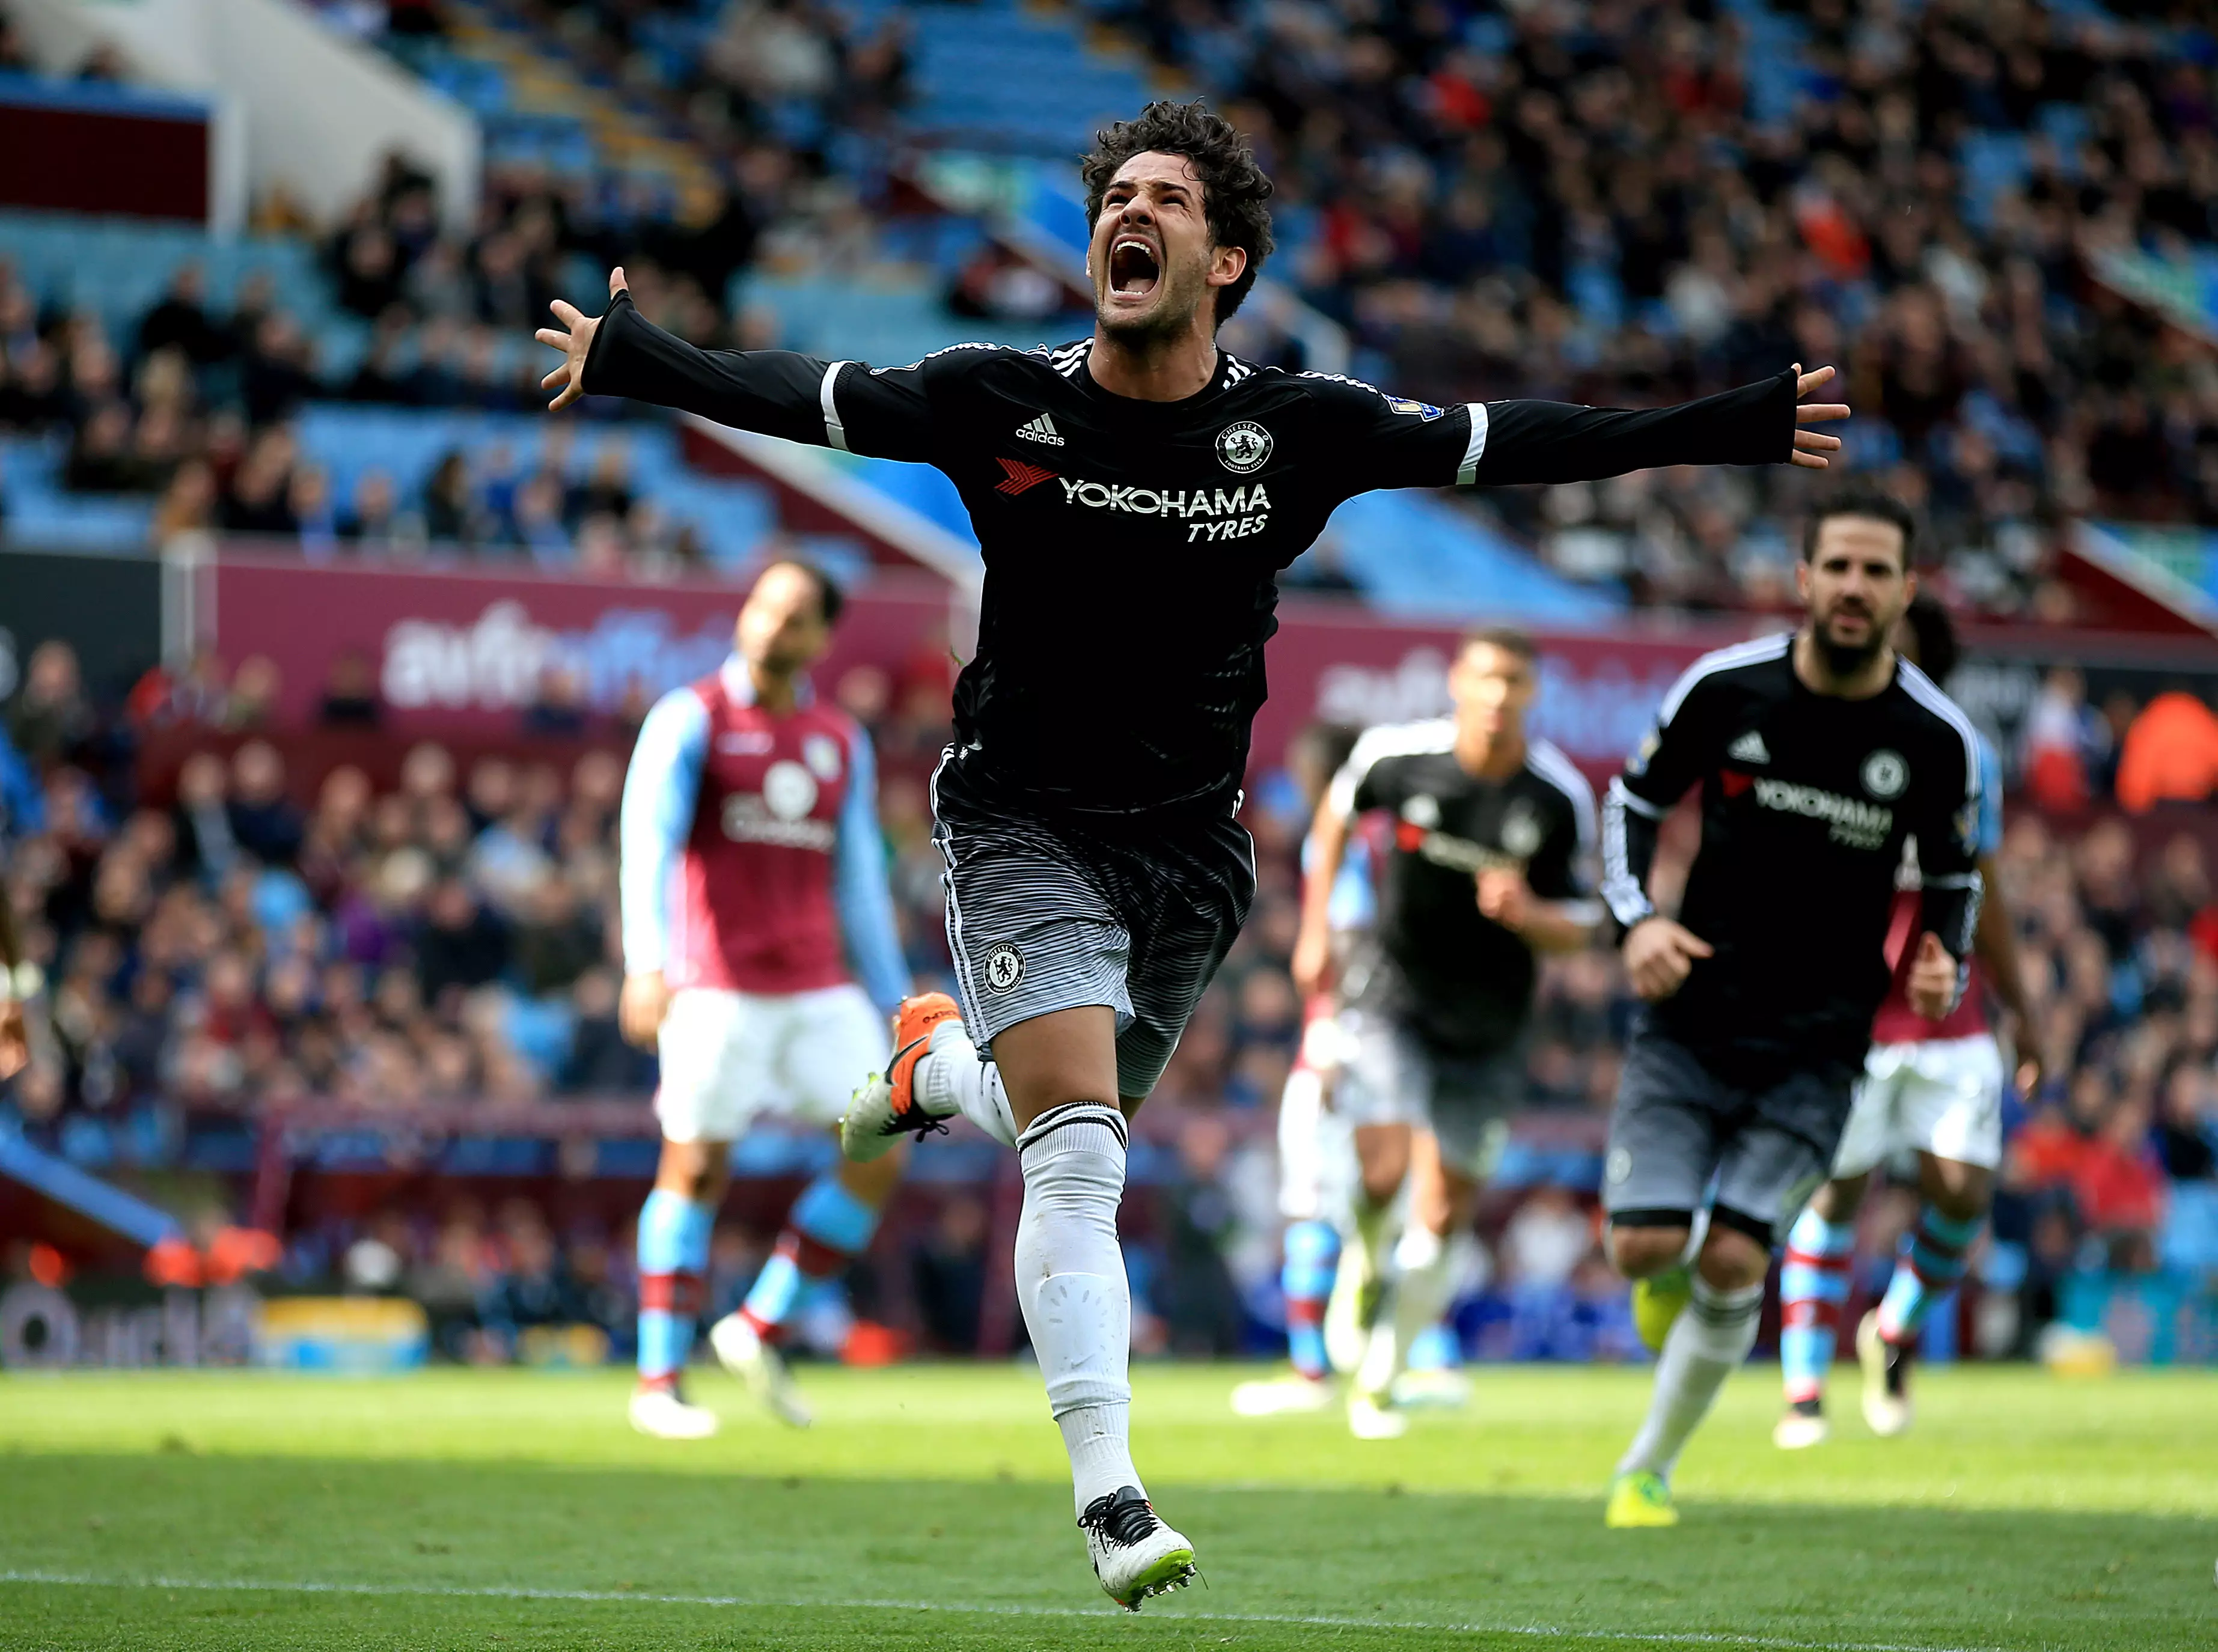 Pato's Next Move Already Being Planned